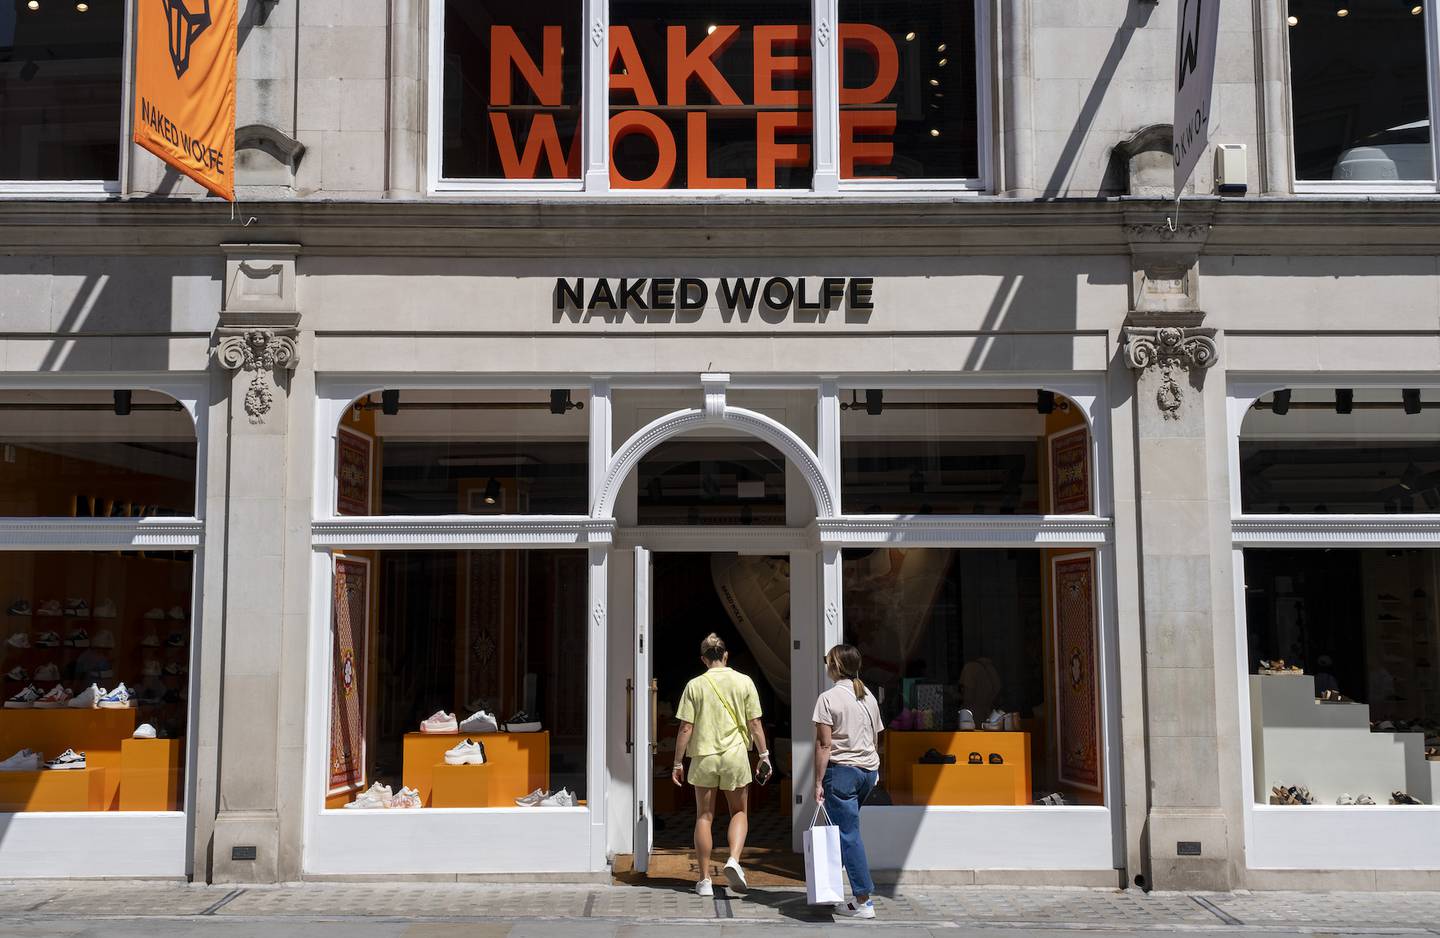 Naked Wolfe's flagship store in London.